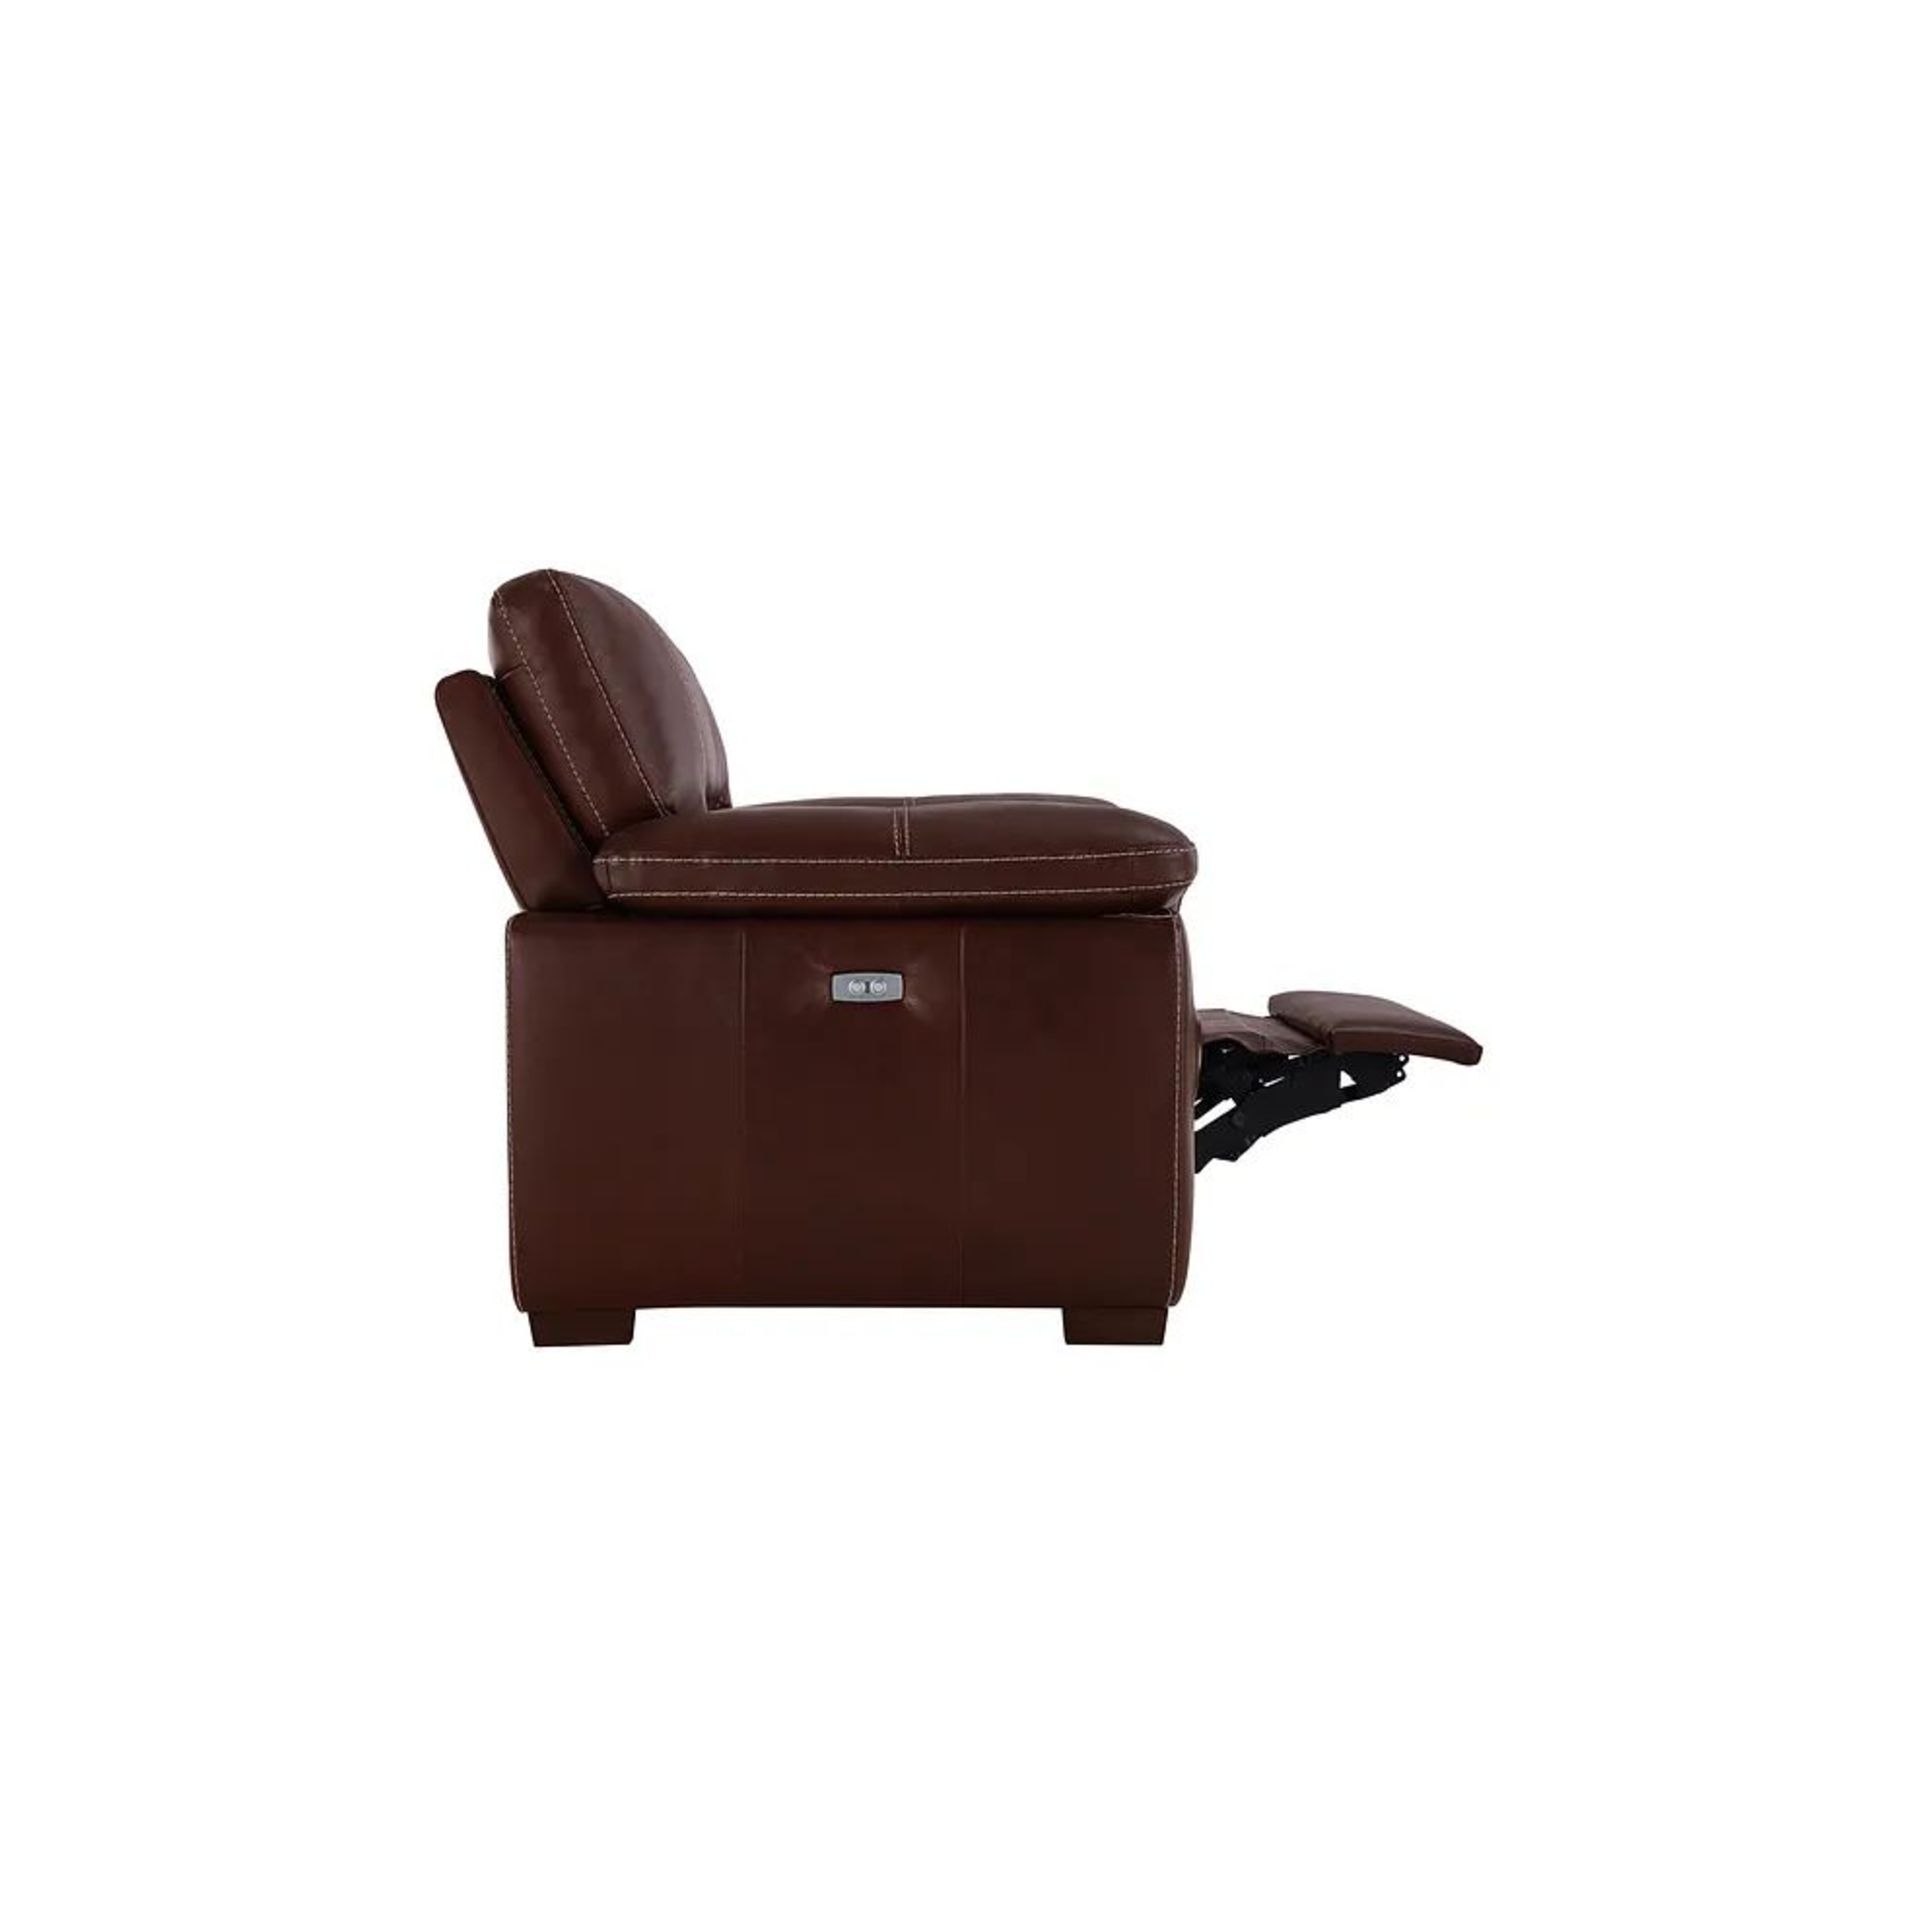 BRAND NEW ARLINGTON Electric Recliner Armchair - TAN LEATHER. RRP £1199. Create a traditional and - Image 7 of 12